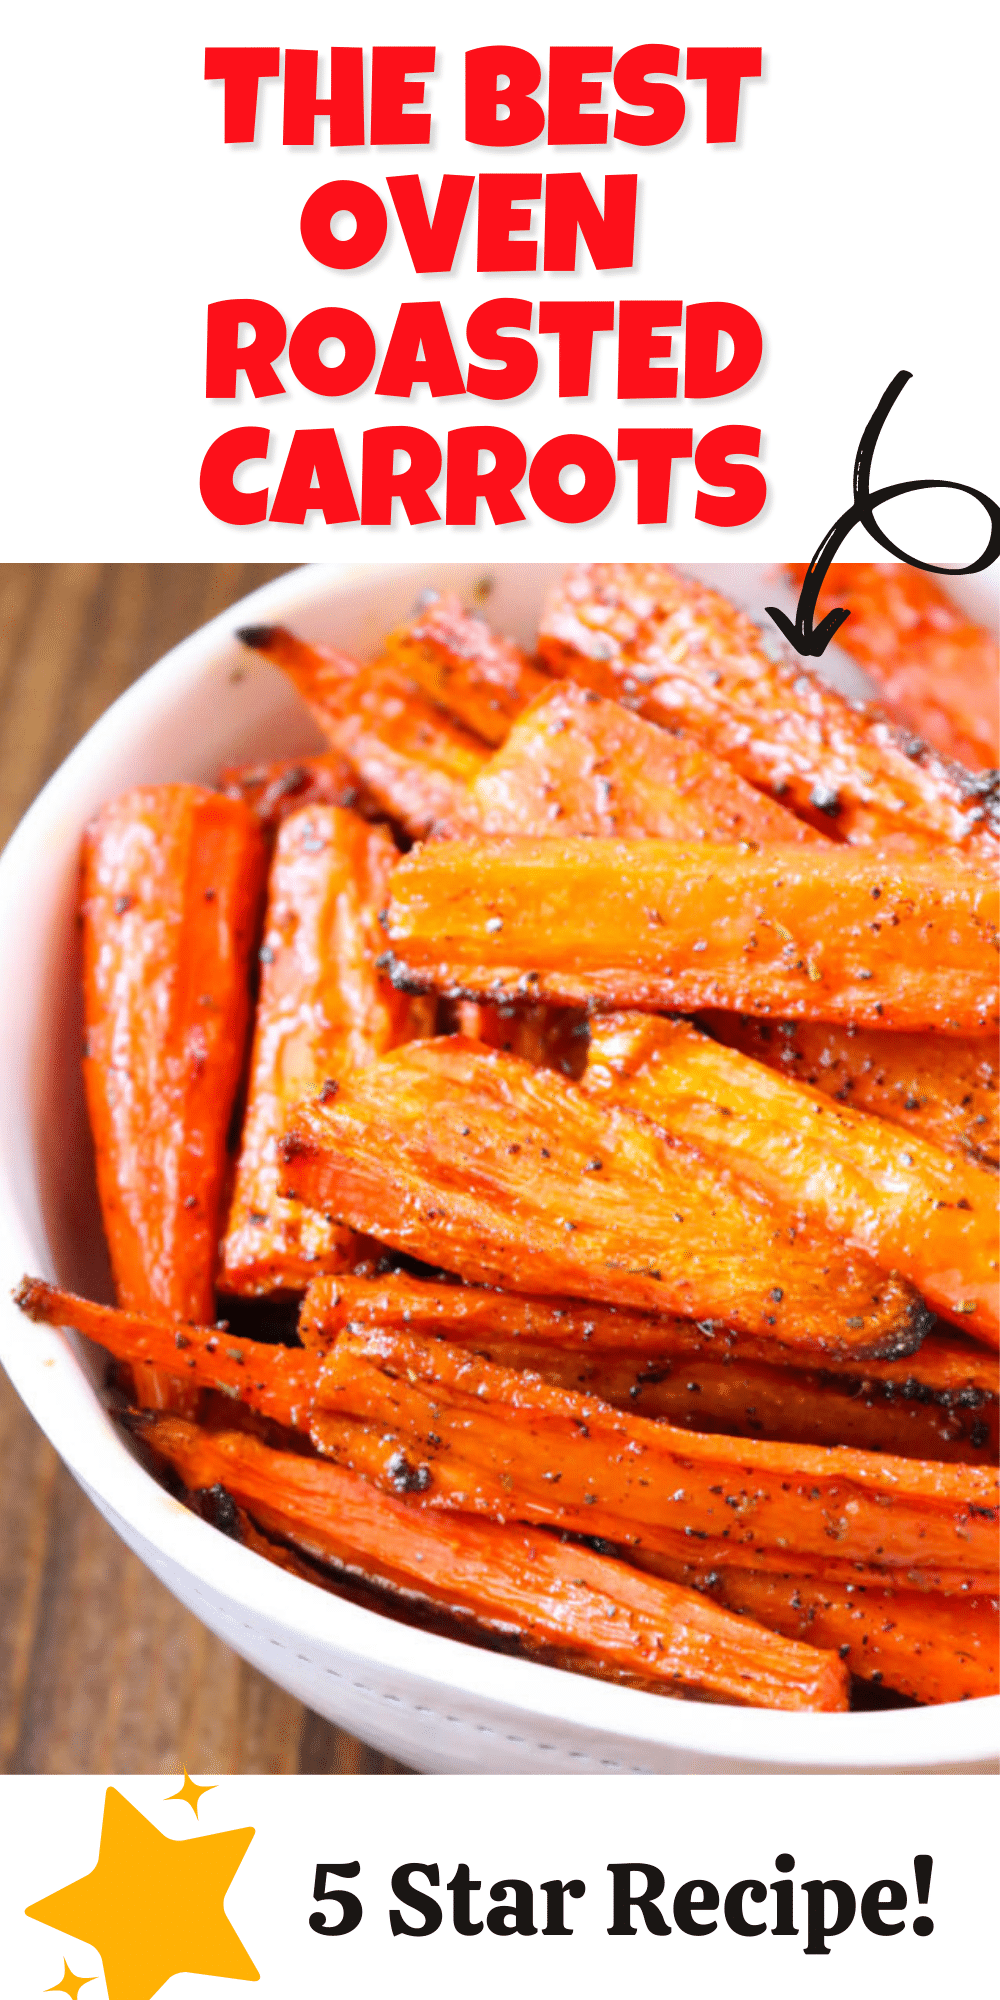 Oven Roasted Carrots make a great side dish that pairs perfect with almost any main course! These cooked carrots are oven roasted with a few seasonings and can be customized to use your favorites from the spice drawer! Ready in under 45 minutes and perfect for weeknights, weekends and meal prep! 

 via @bigbearswife